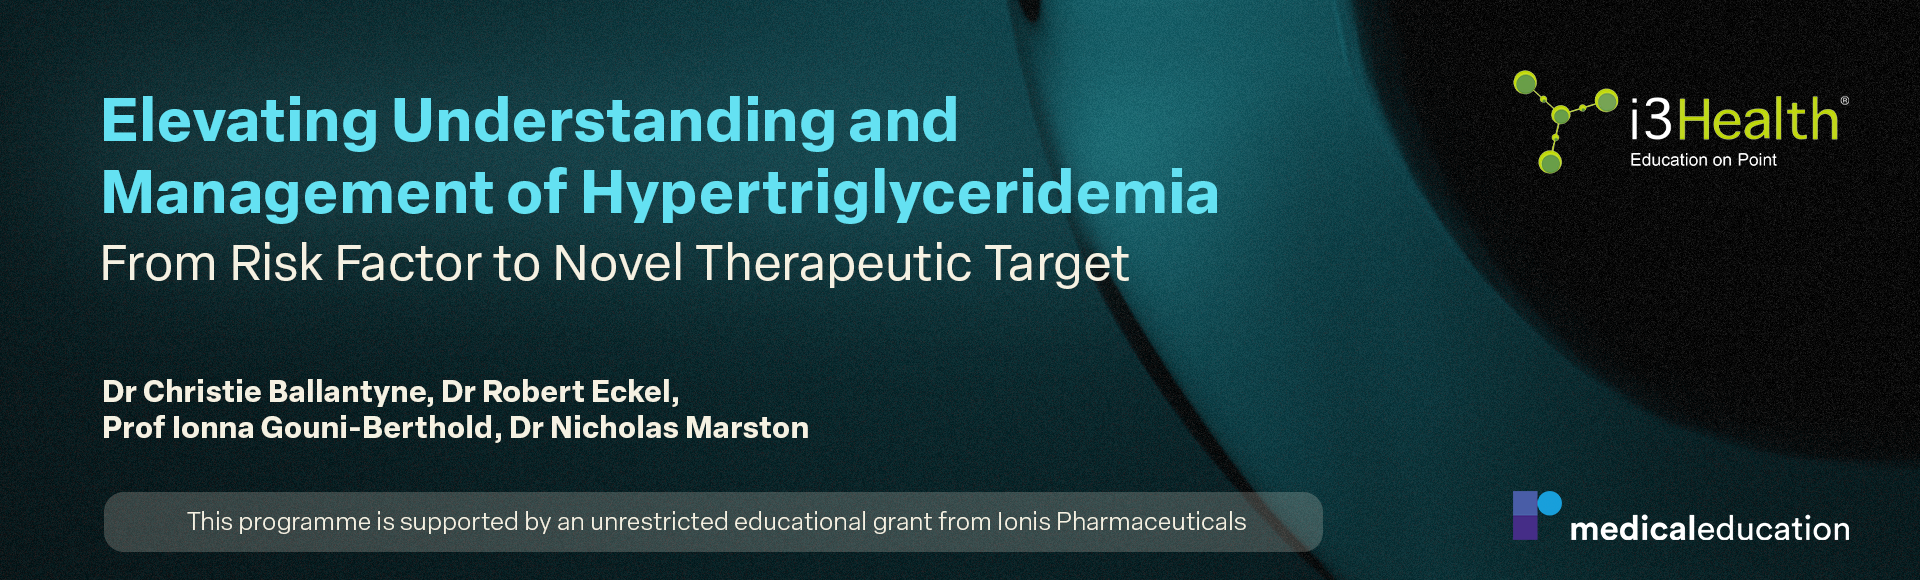 Elevating Understanding and Management of Hypertriglyceridemia